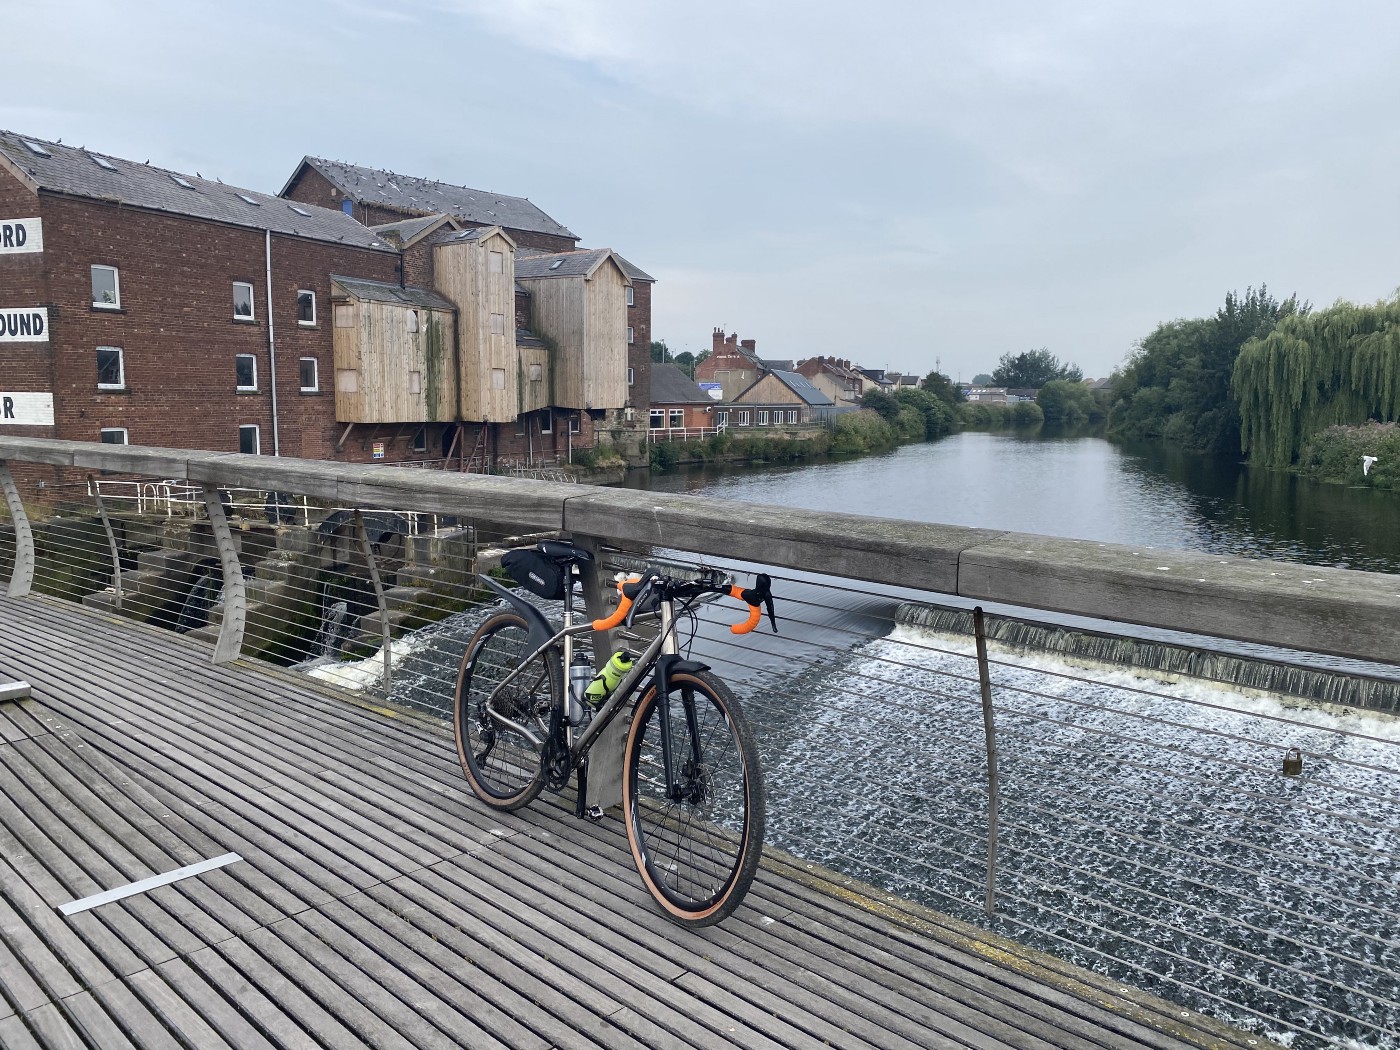 A Sonder Camino gravel bike on a bridge above Castleford Wier on the River Aire